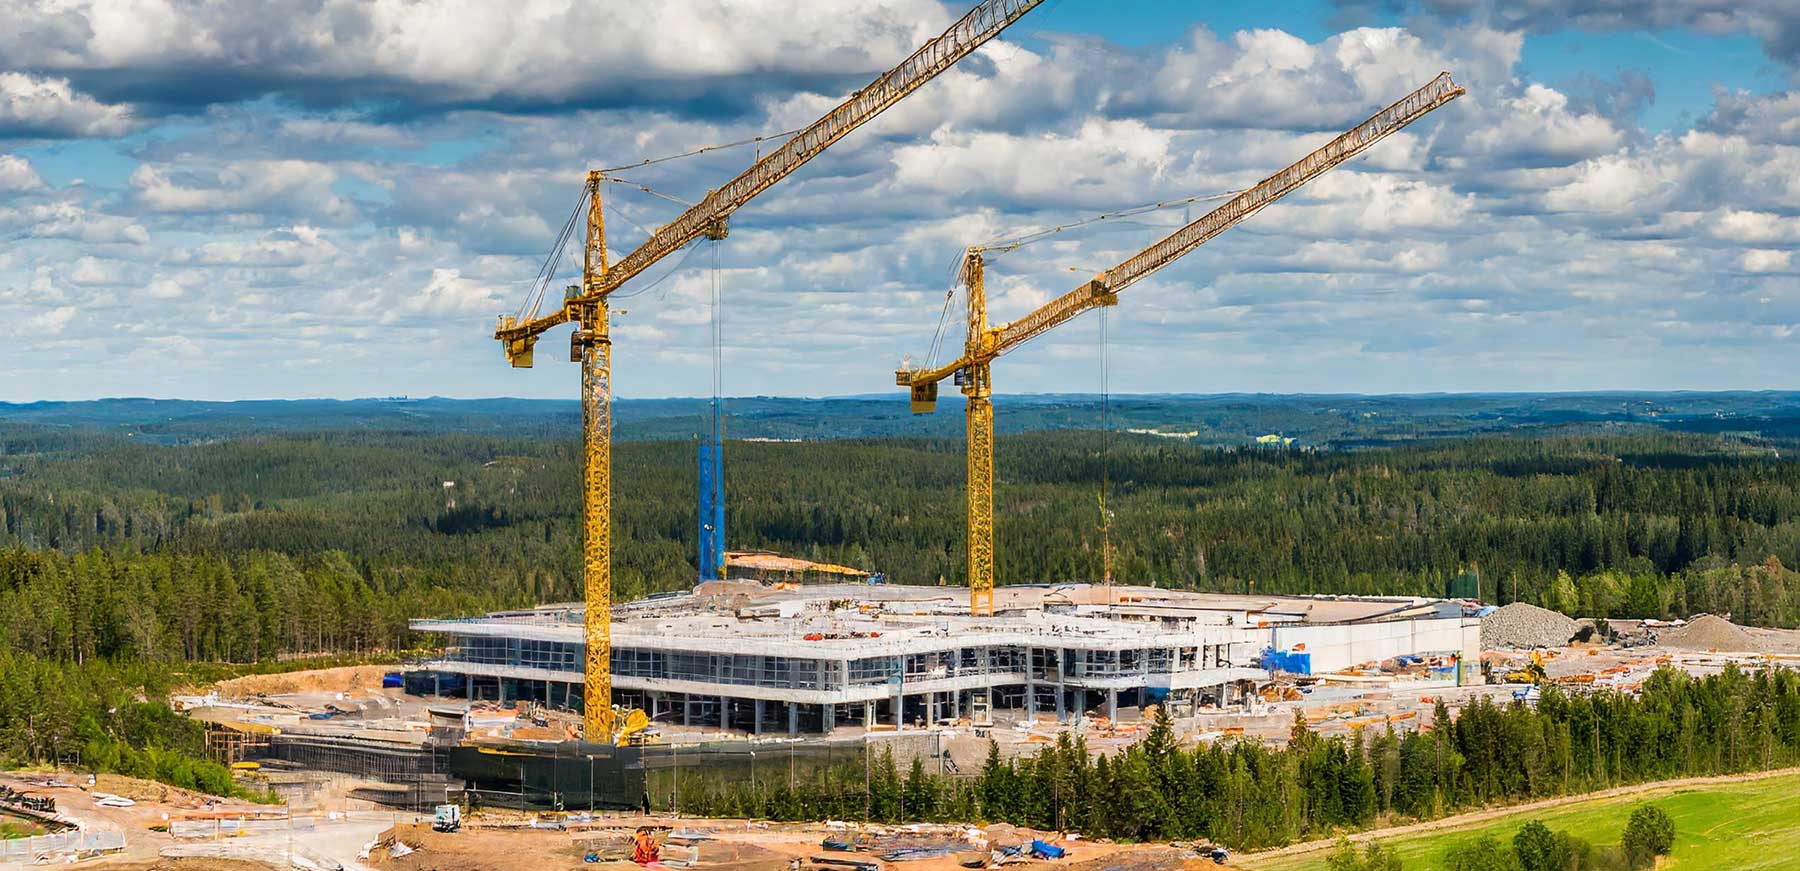 Construction Firms in Sweden Face Unprecedented Bankruptcy Rates Daily